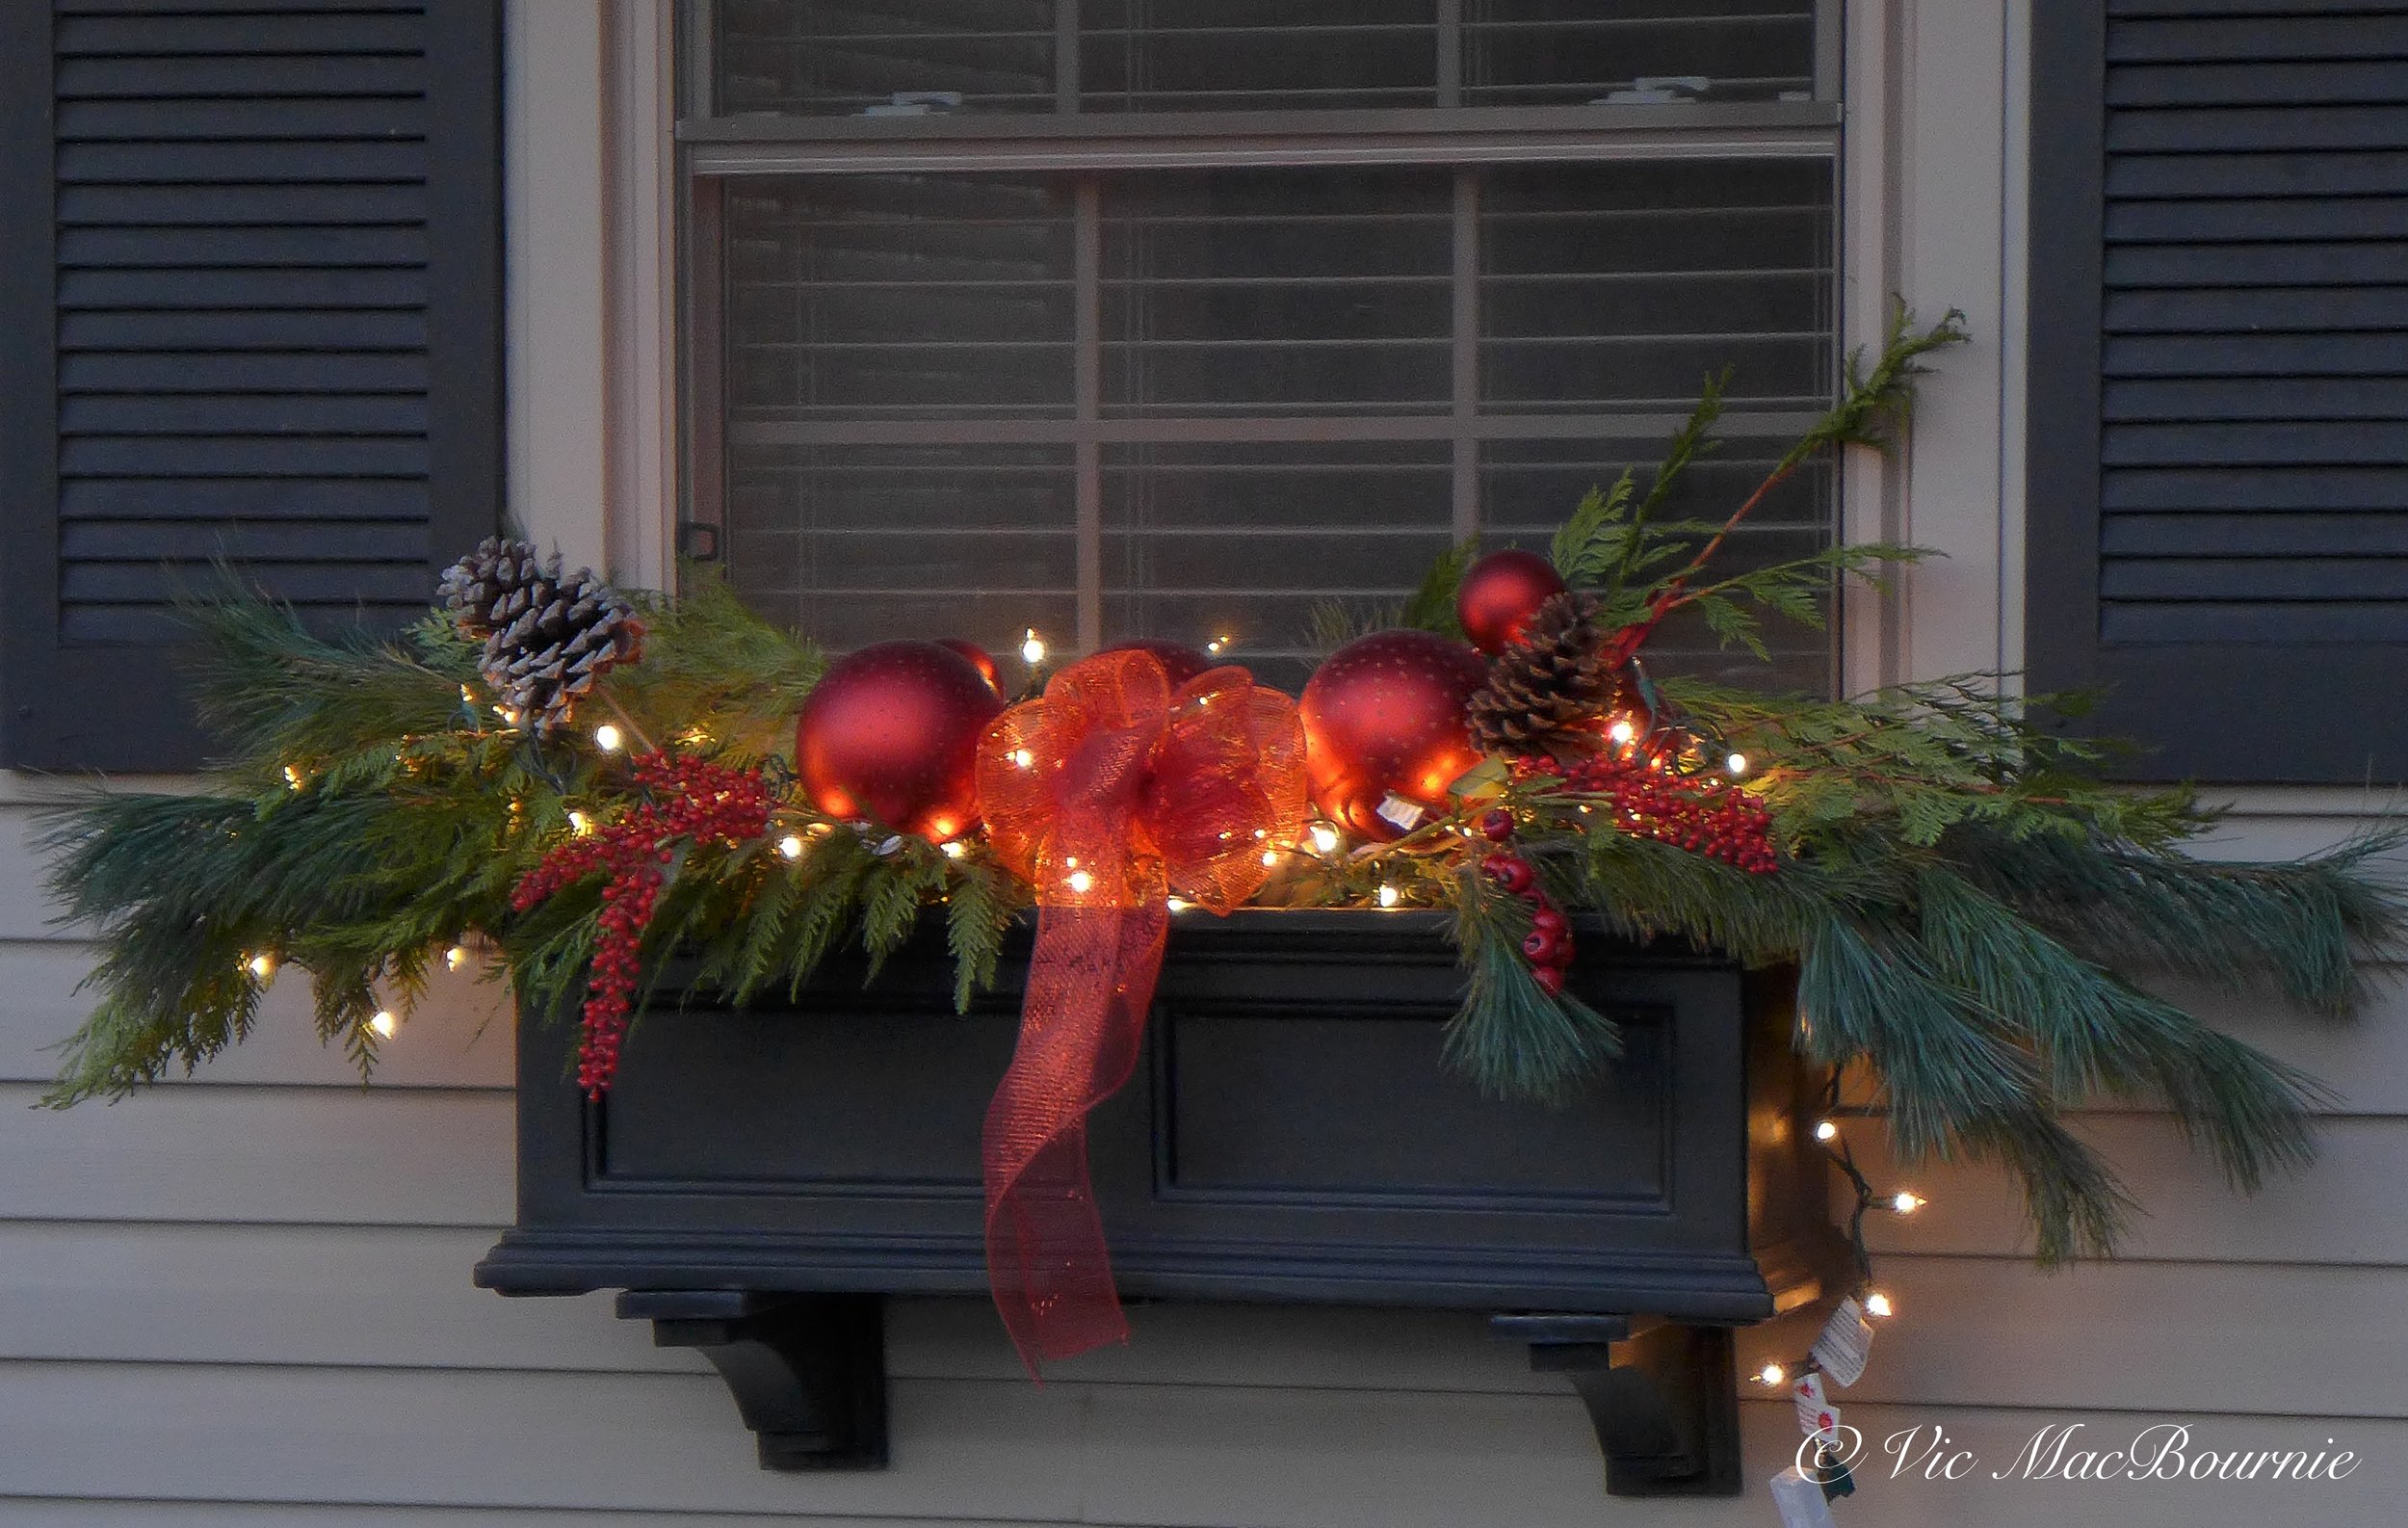 These Mayne window boxes add a festive mood and a warm welcome to the front garden.